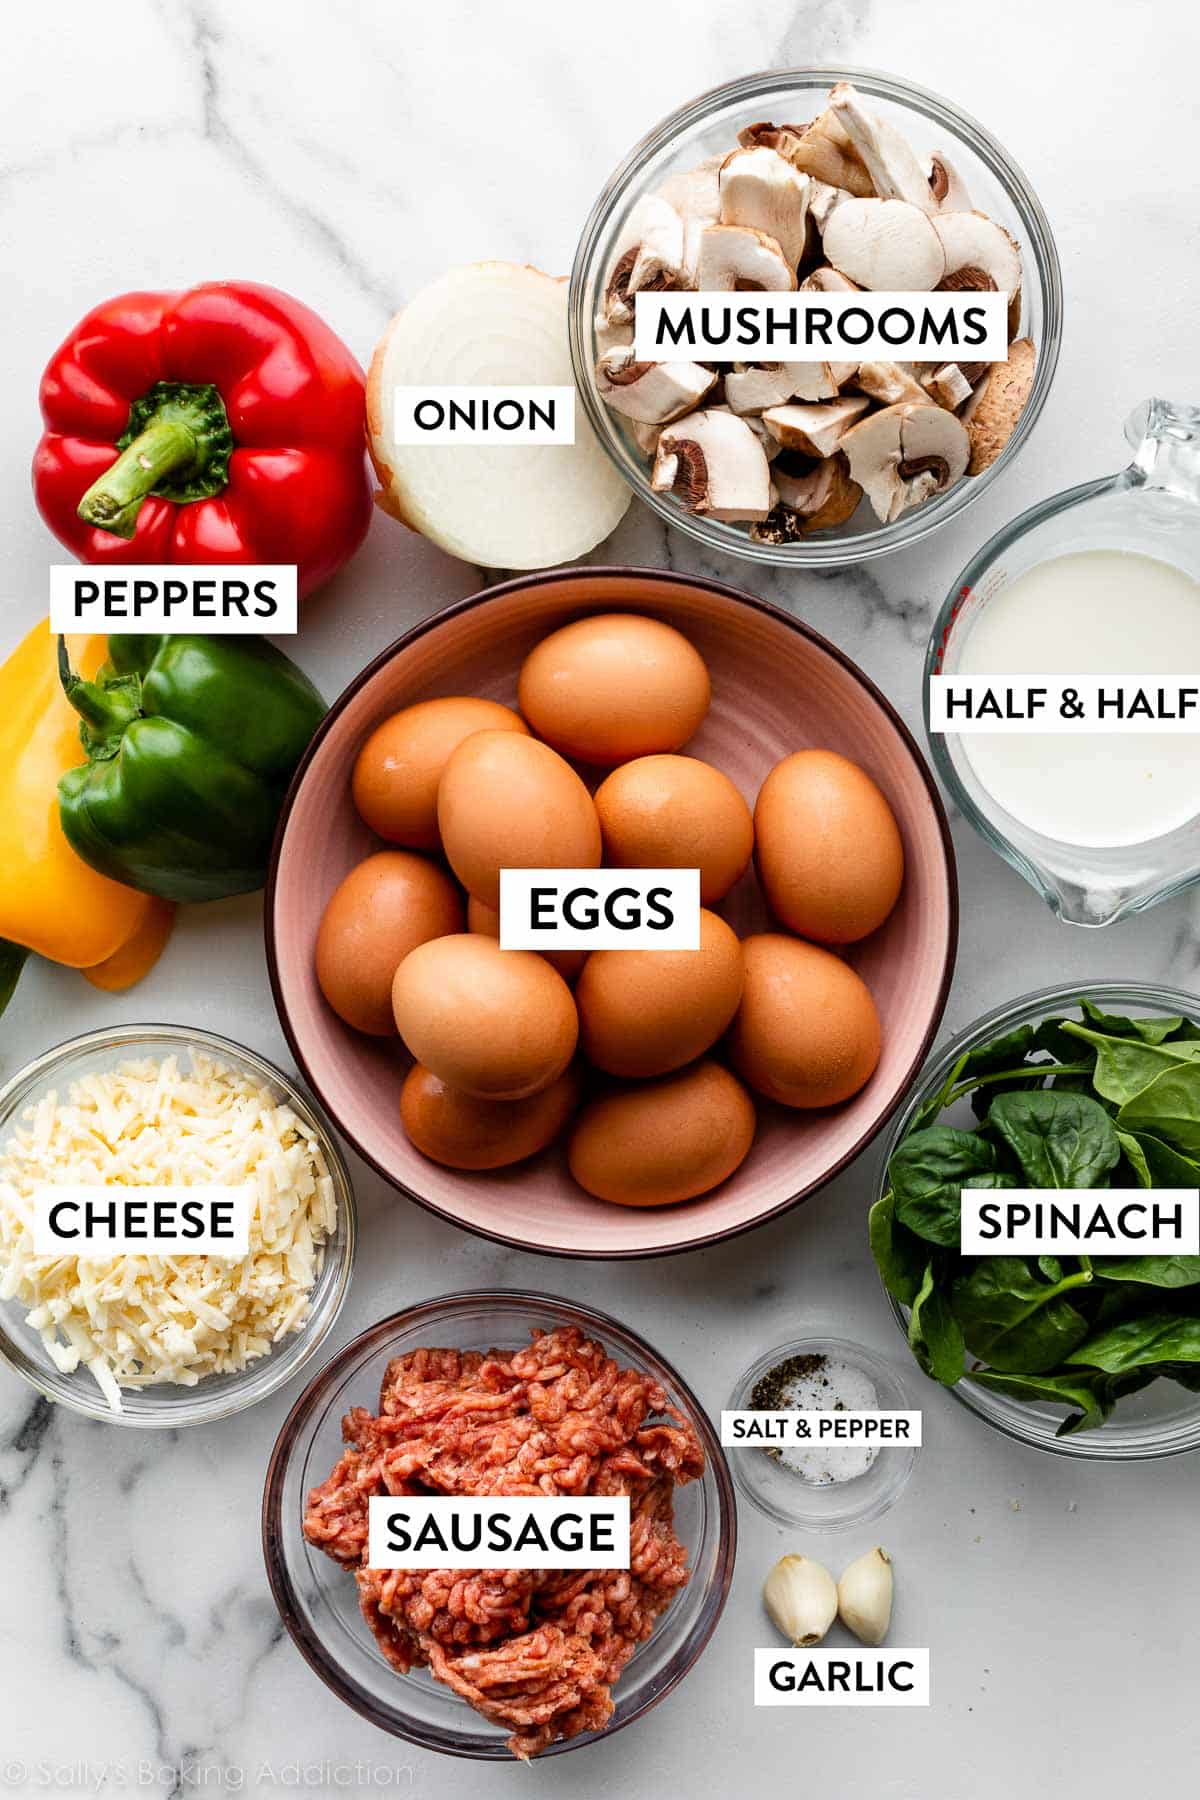 eggs, half-and-half, spinach, garlic, sausage, cheese, peppers, and other ingredients.